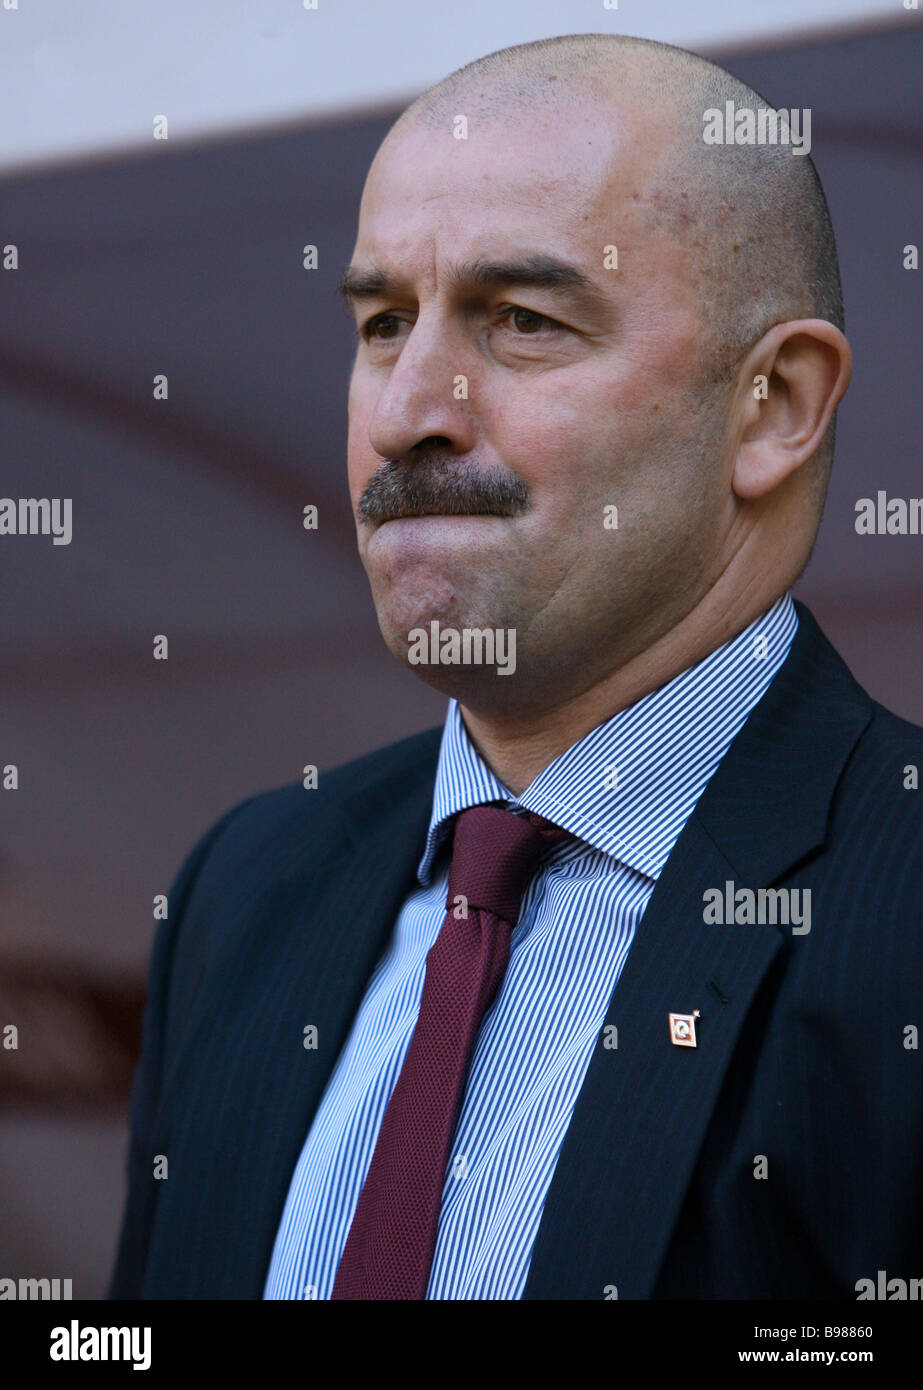 The Russian Football Championship Stanislav Cherchesov the new head coach  of Spartak Moscow during a match between Spartak Stock Photo - Alamy